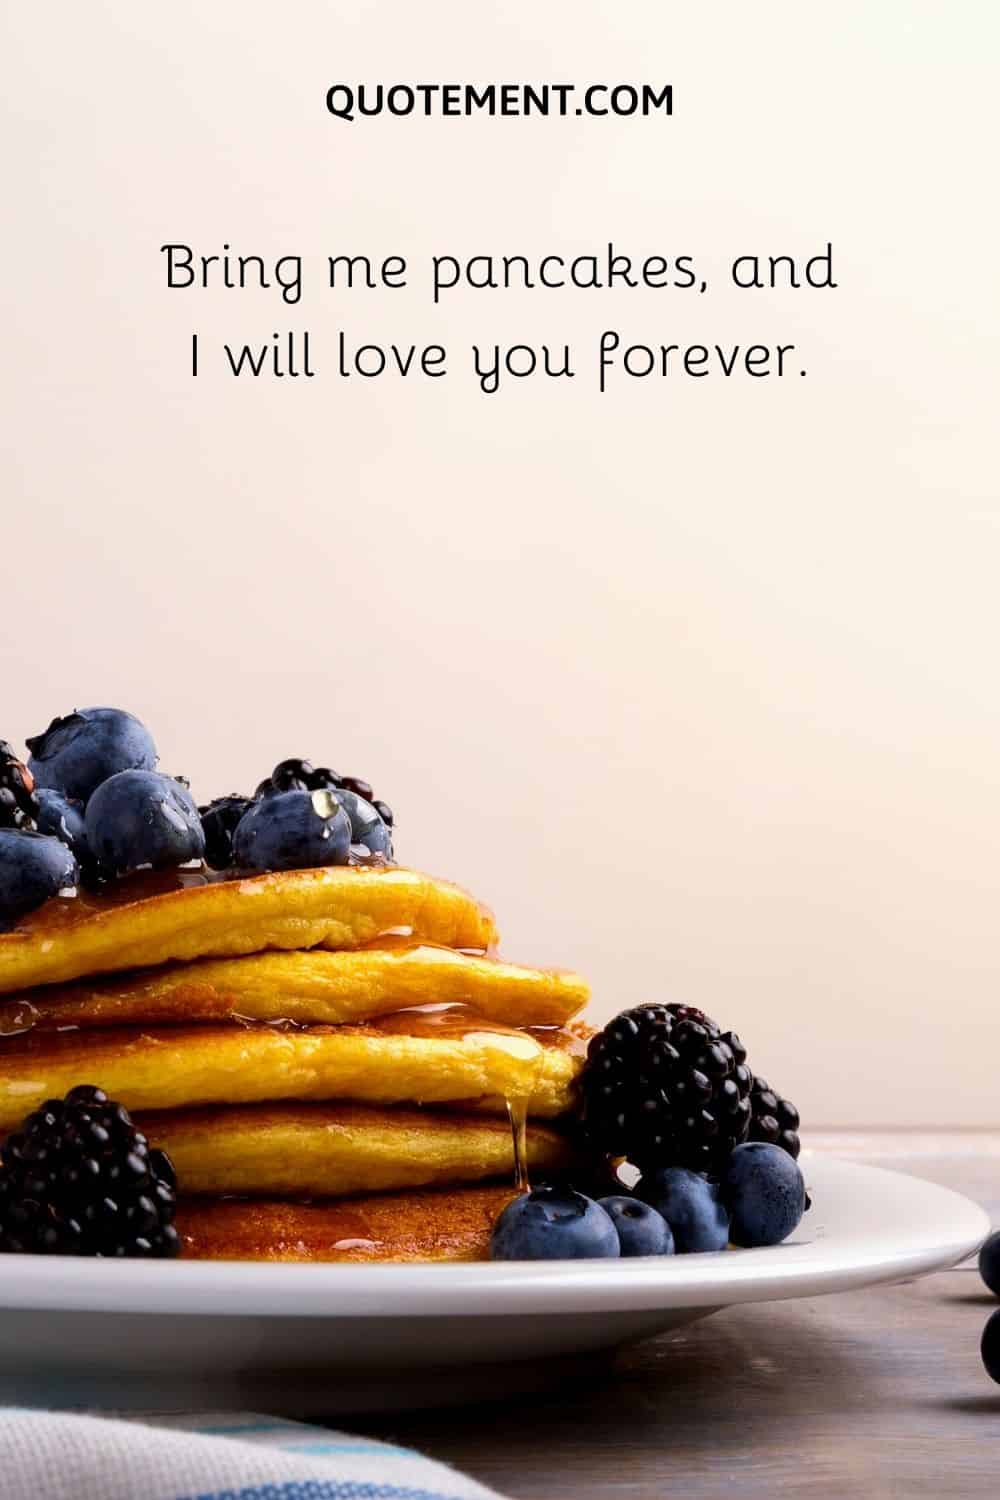 Bring me pancakes, and I will love you forever